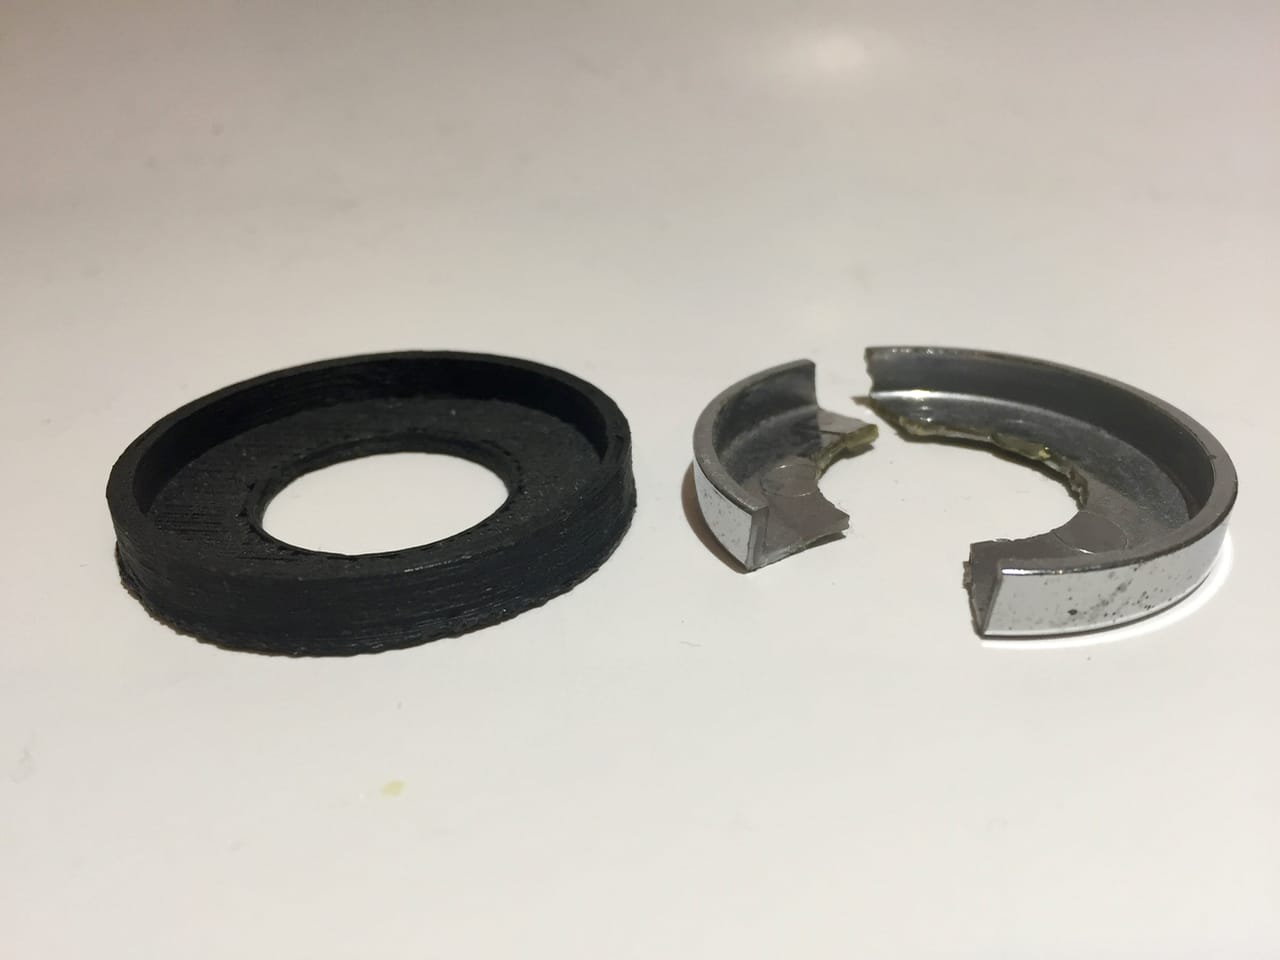  A simple 3D printed replacement for a broken plastic part 